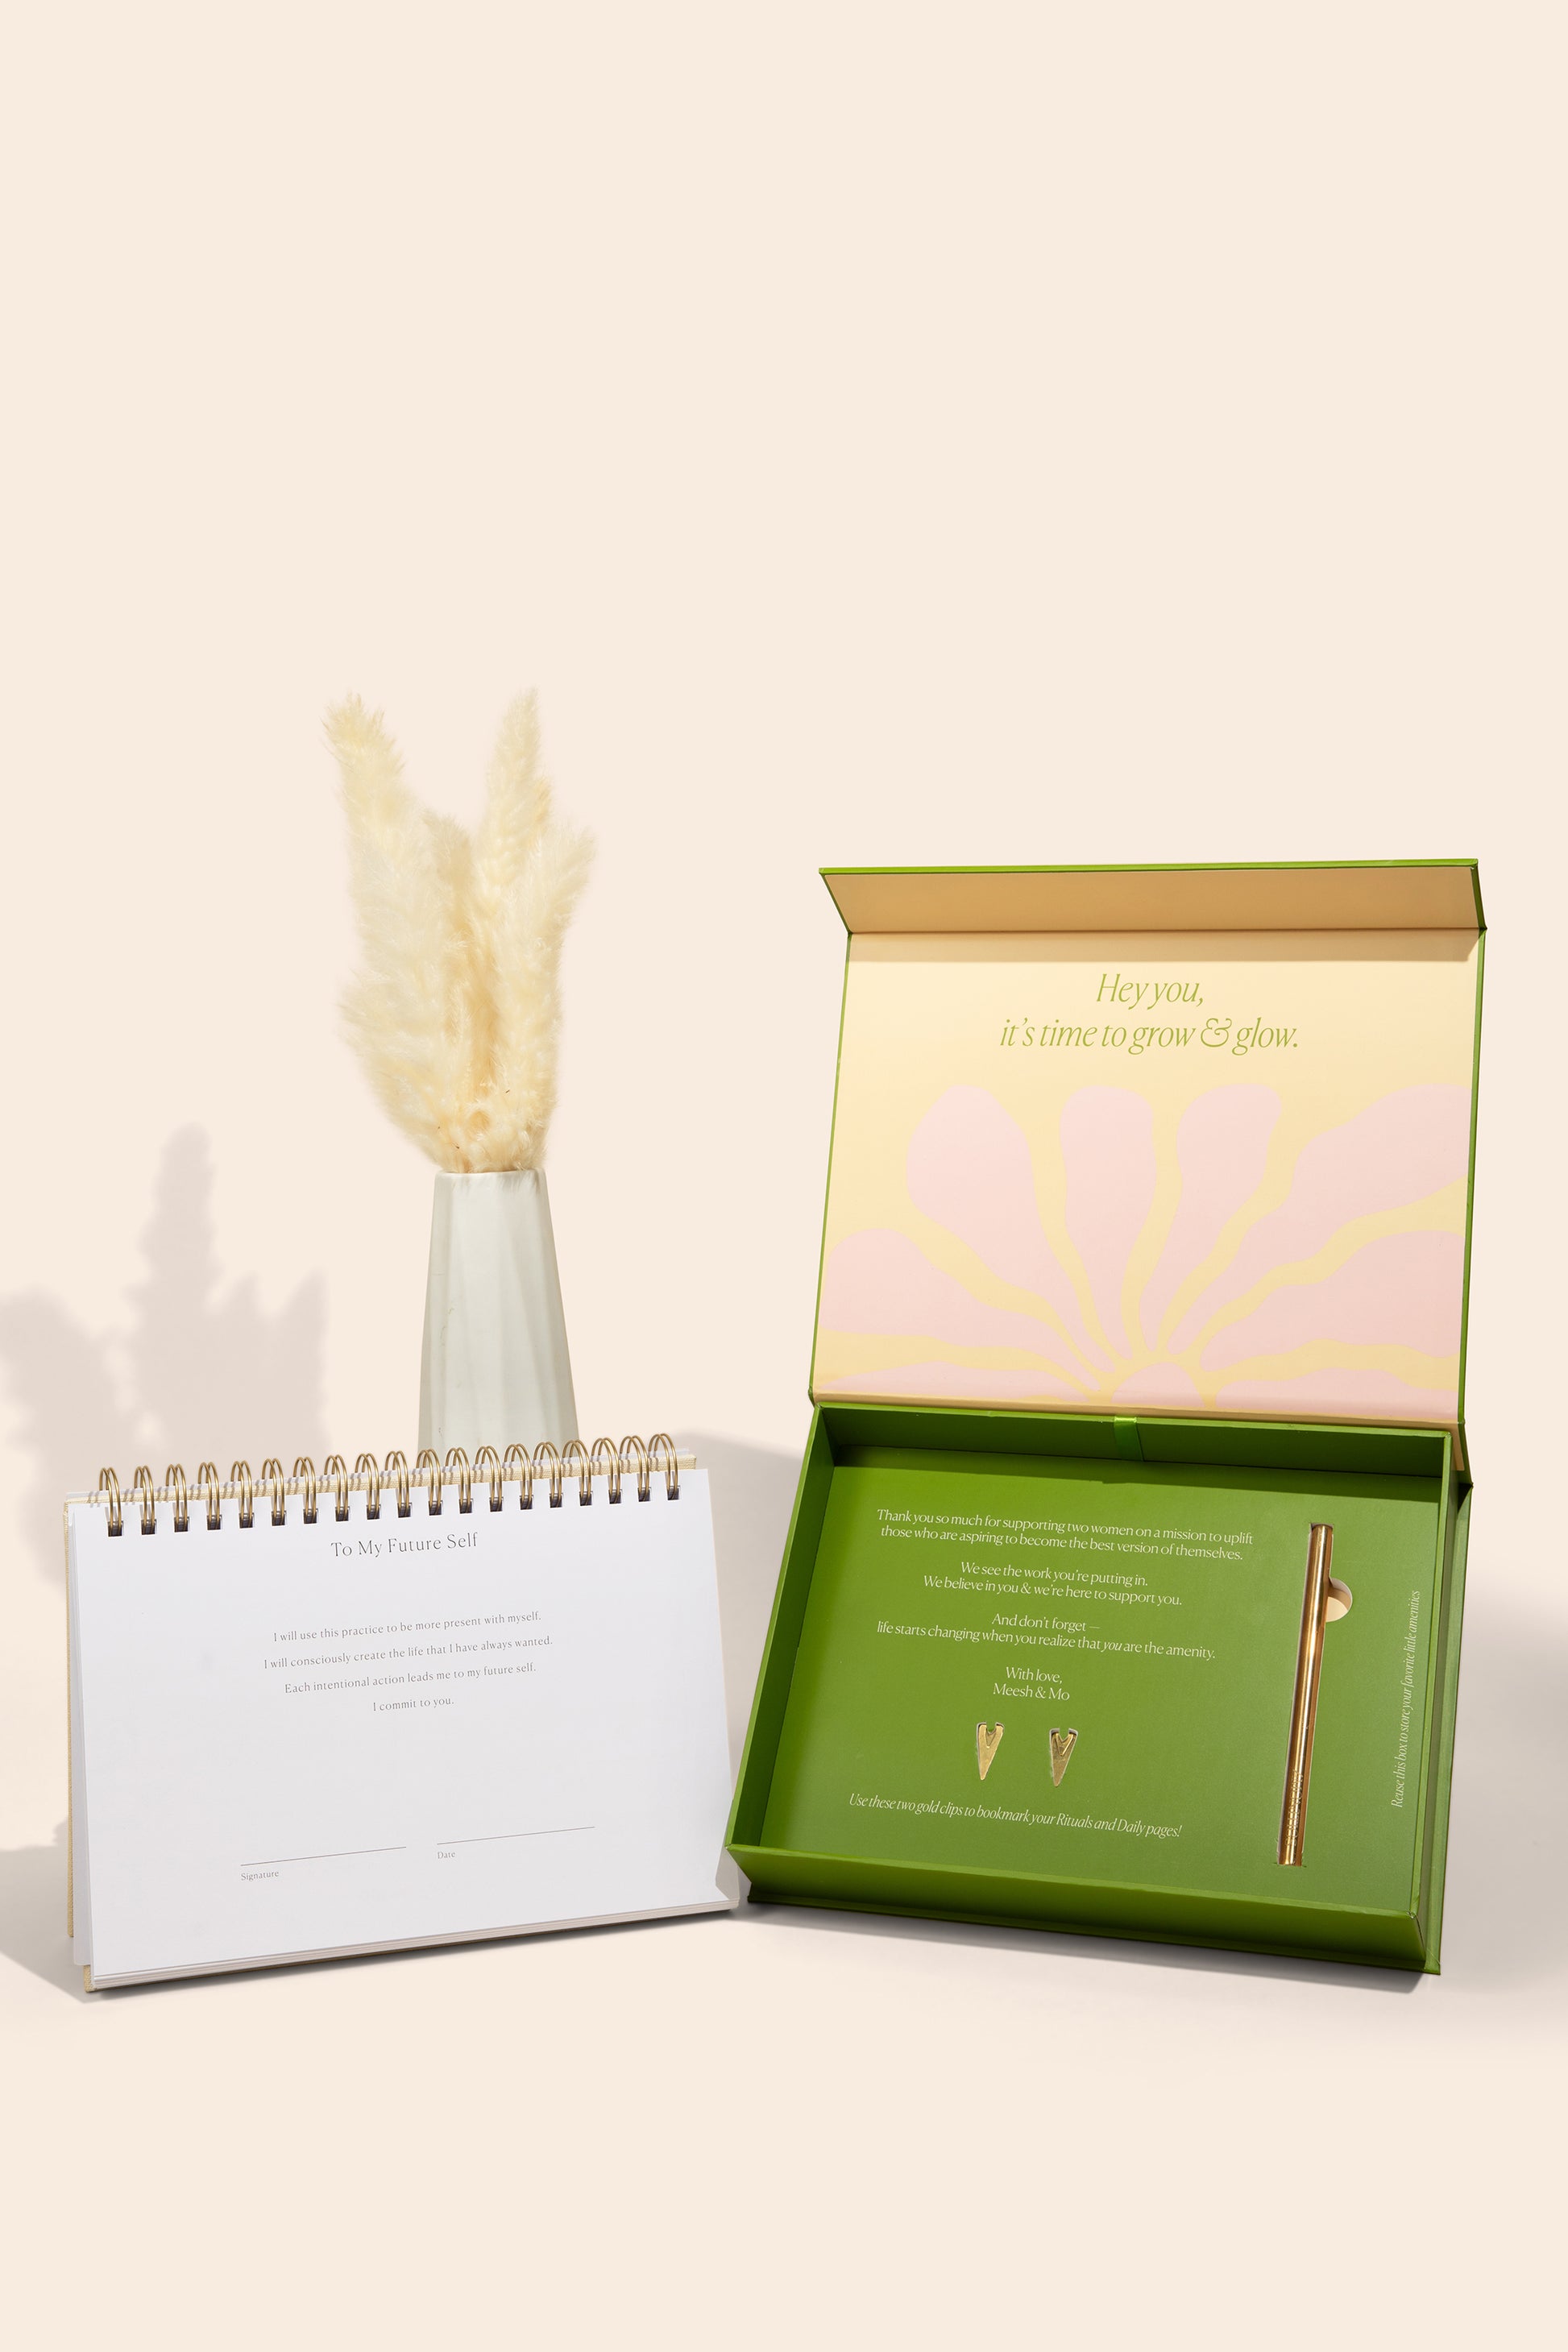 The Daily Journal Deluxe Gift Set – Amenities